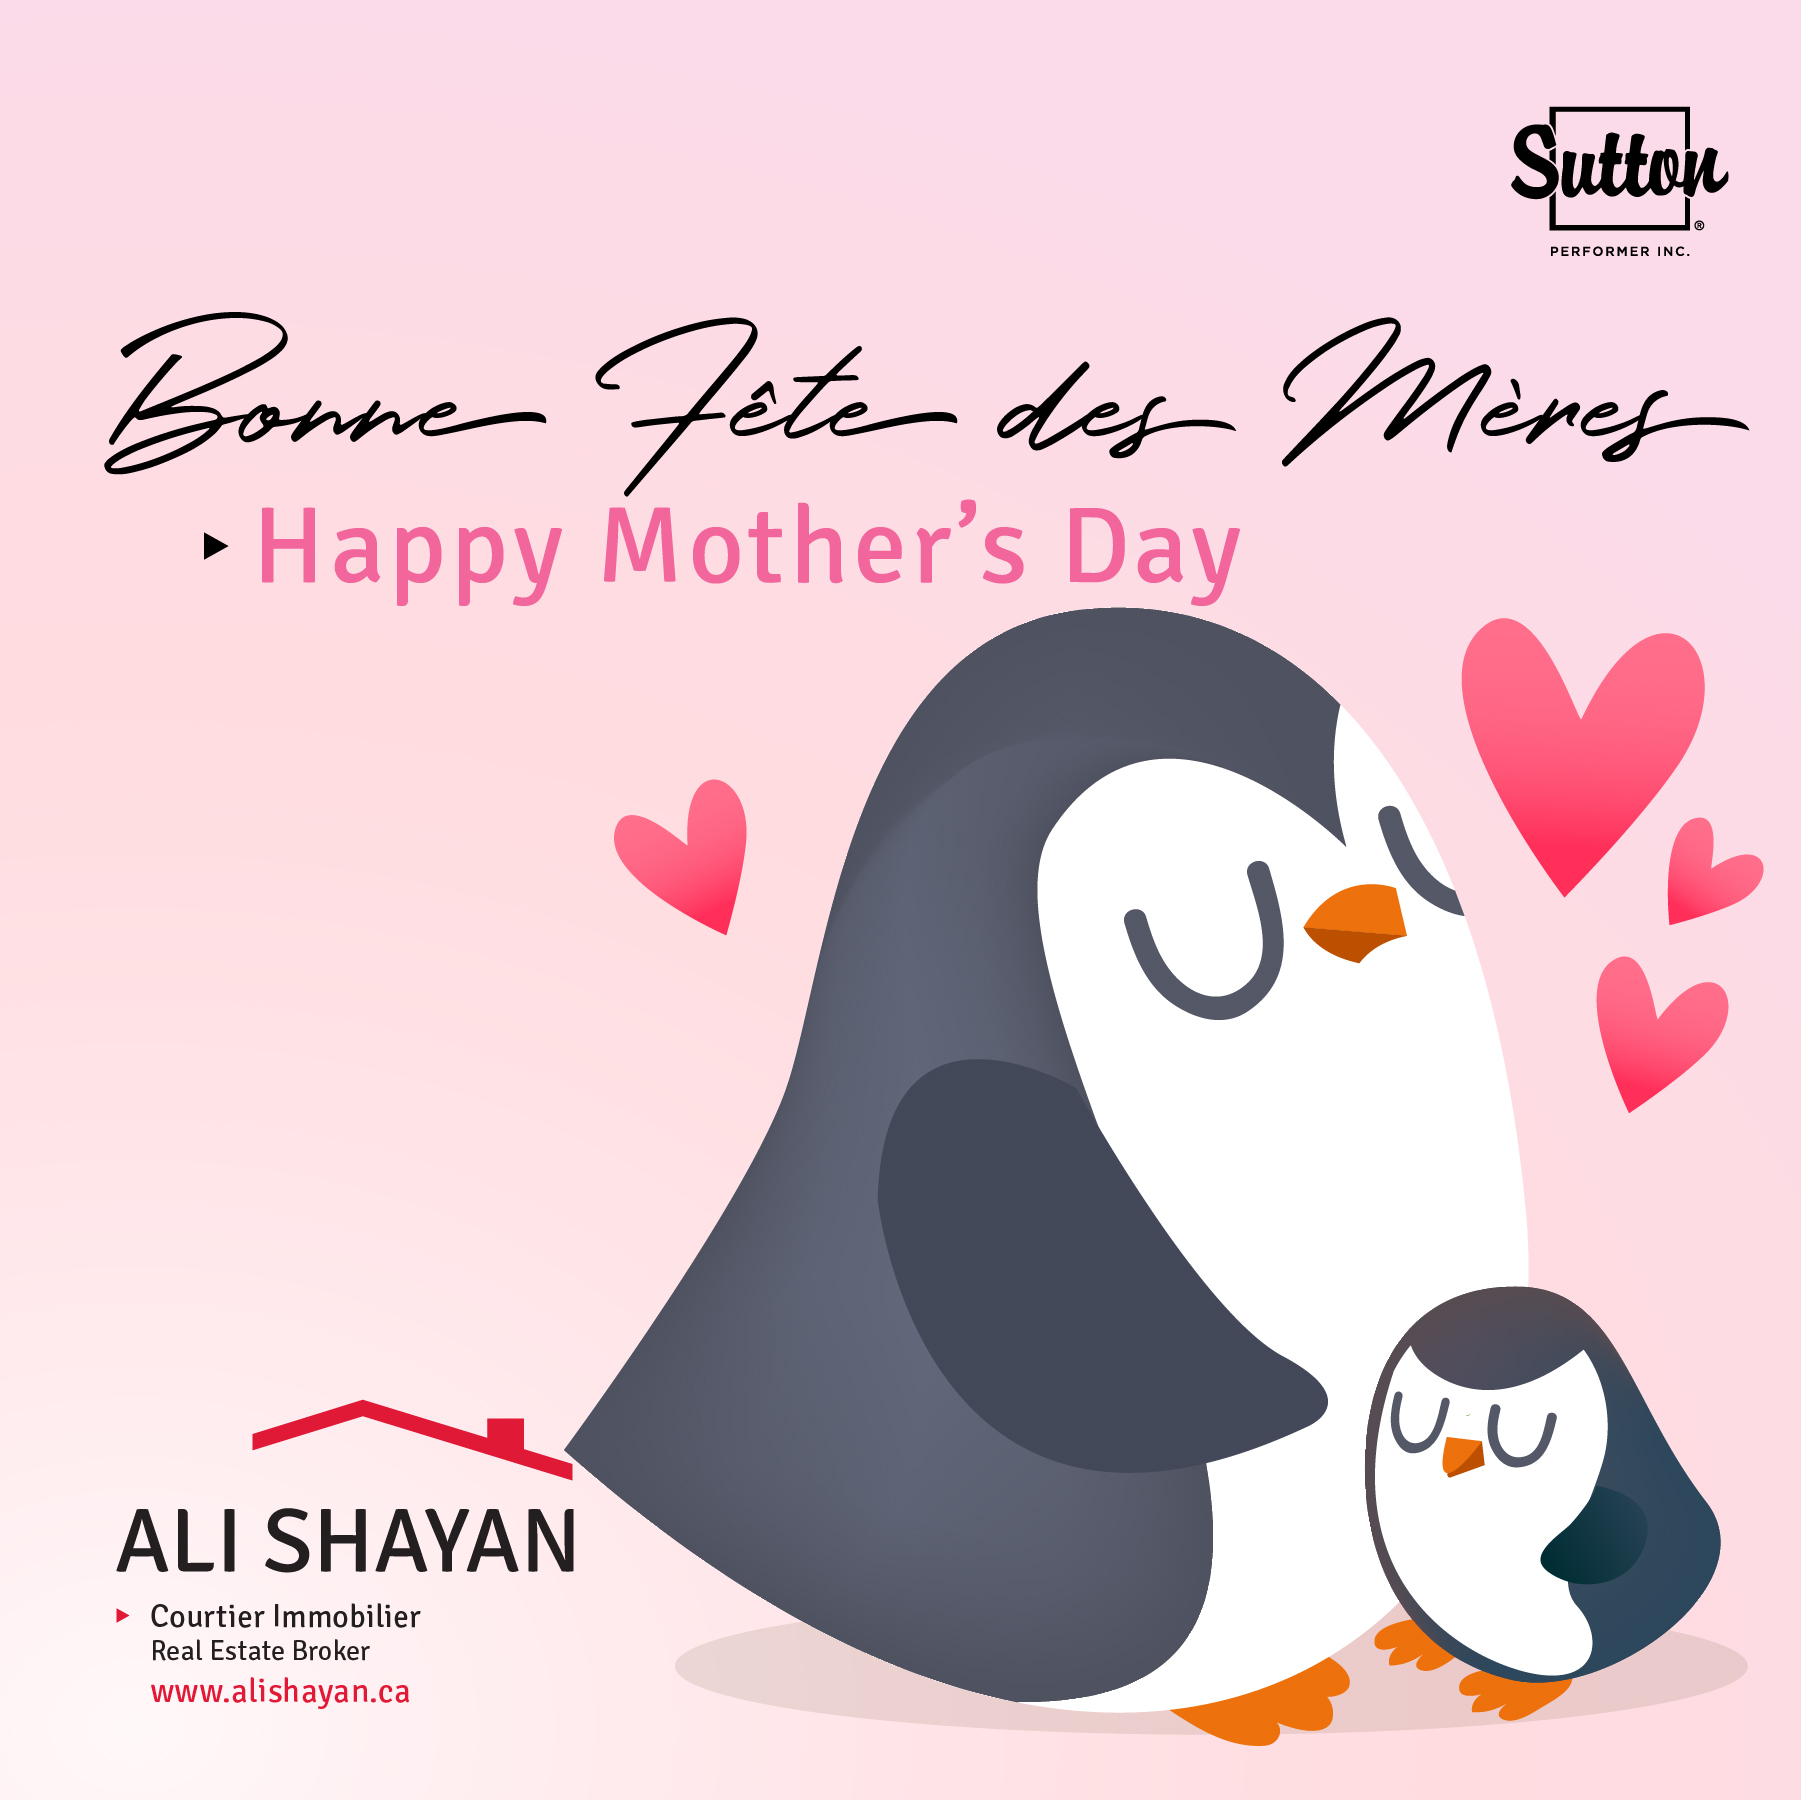 Illustration of a mama and baby penguin surrounded by hearts, on a pick background with 'Happy Mother's Day' written above. Designed for real estate broker Ali Shayan.